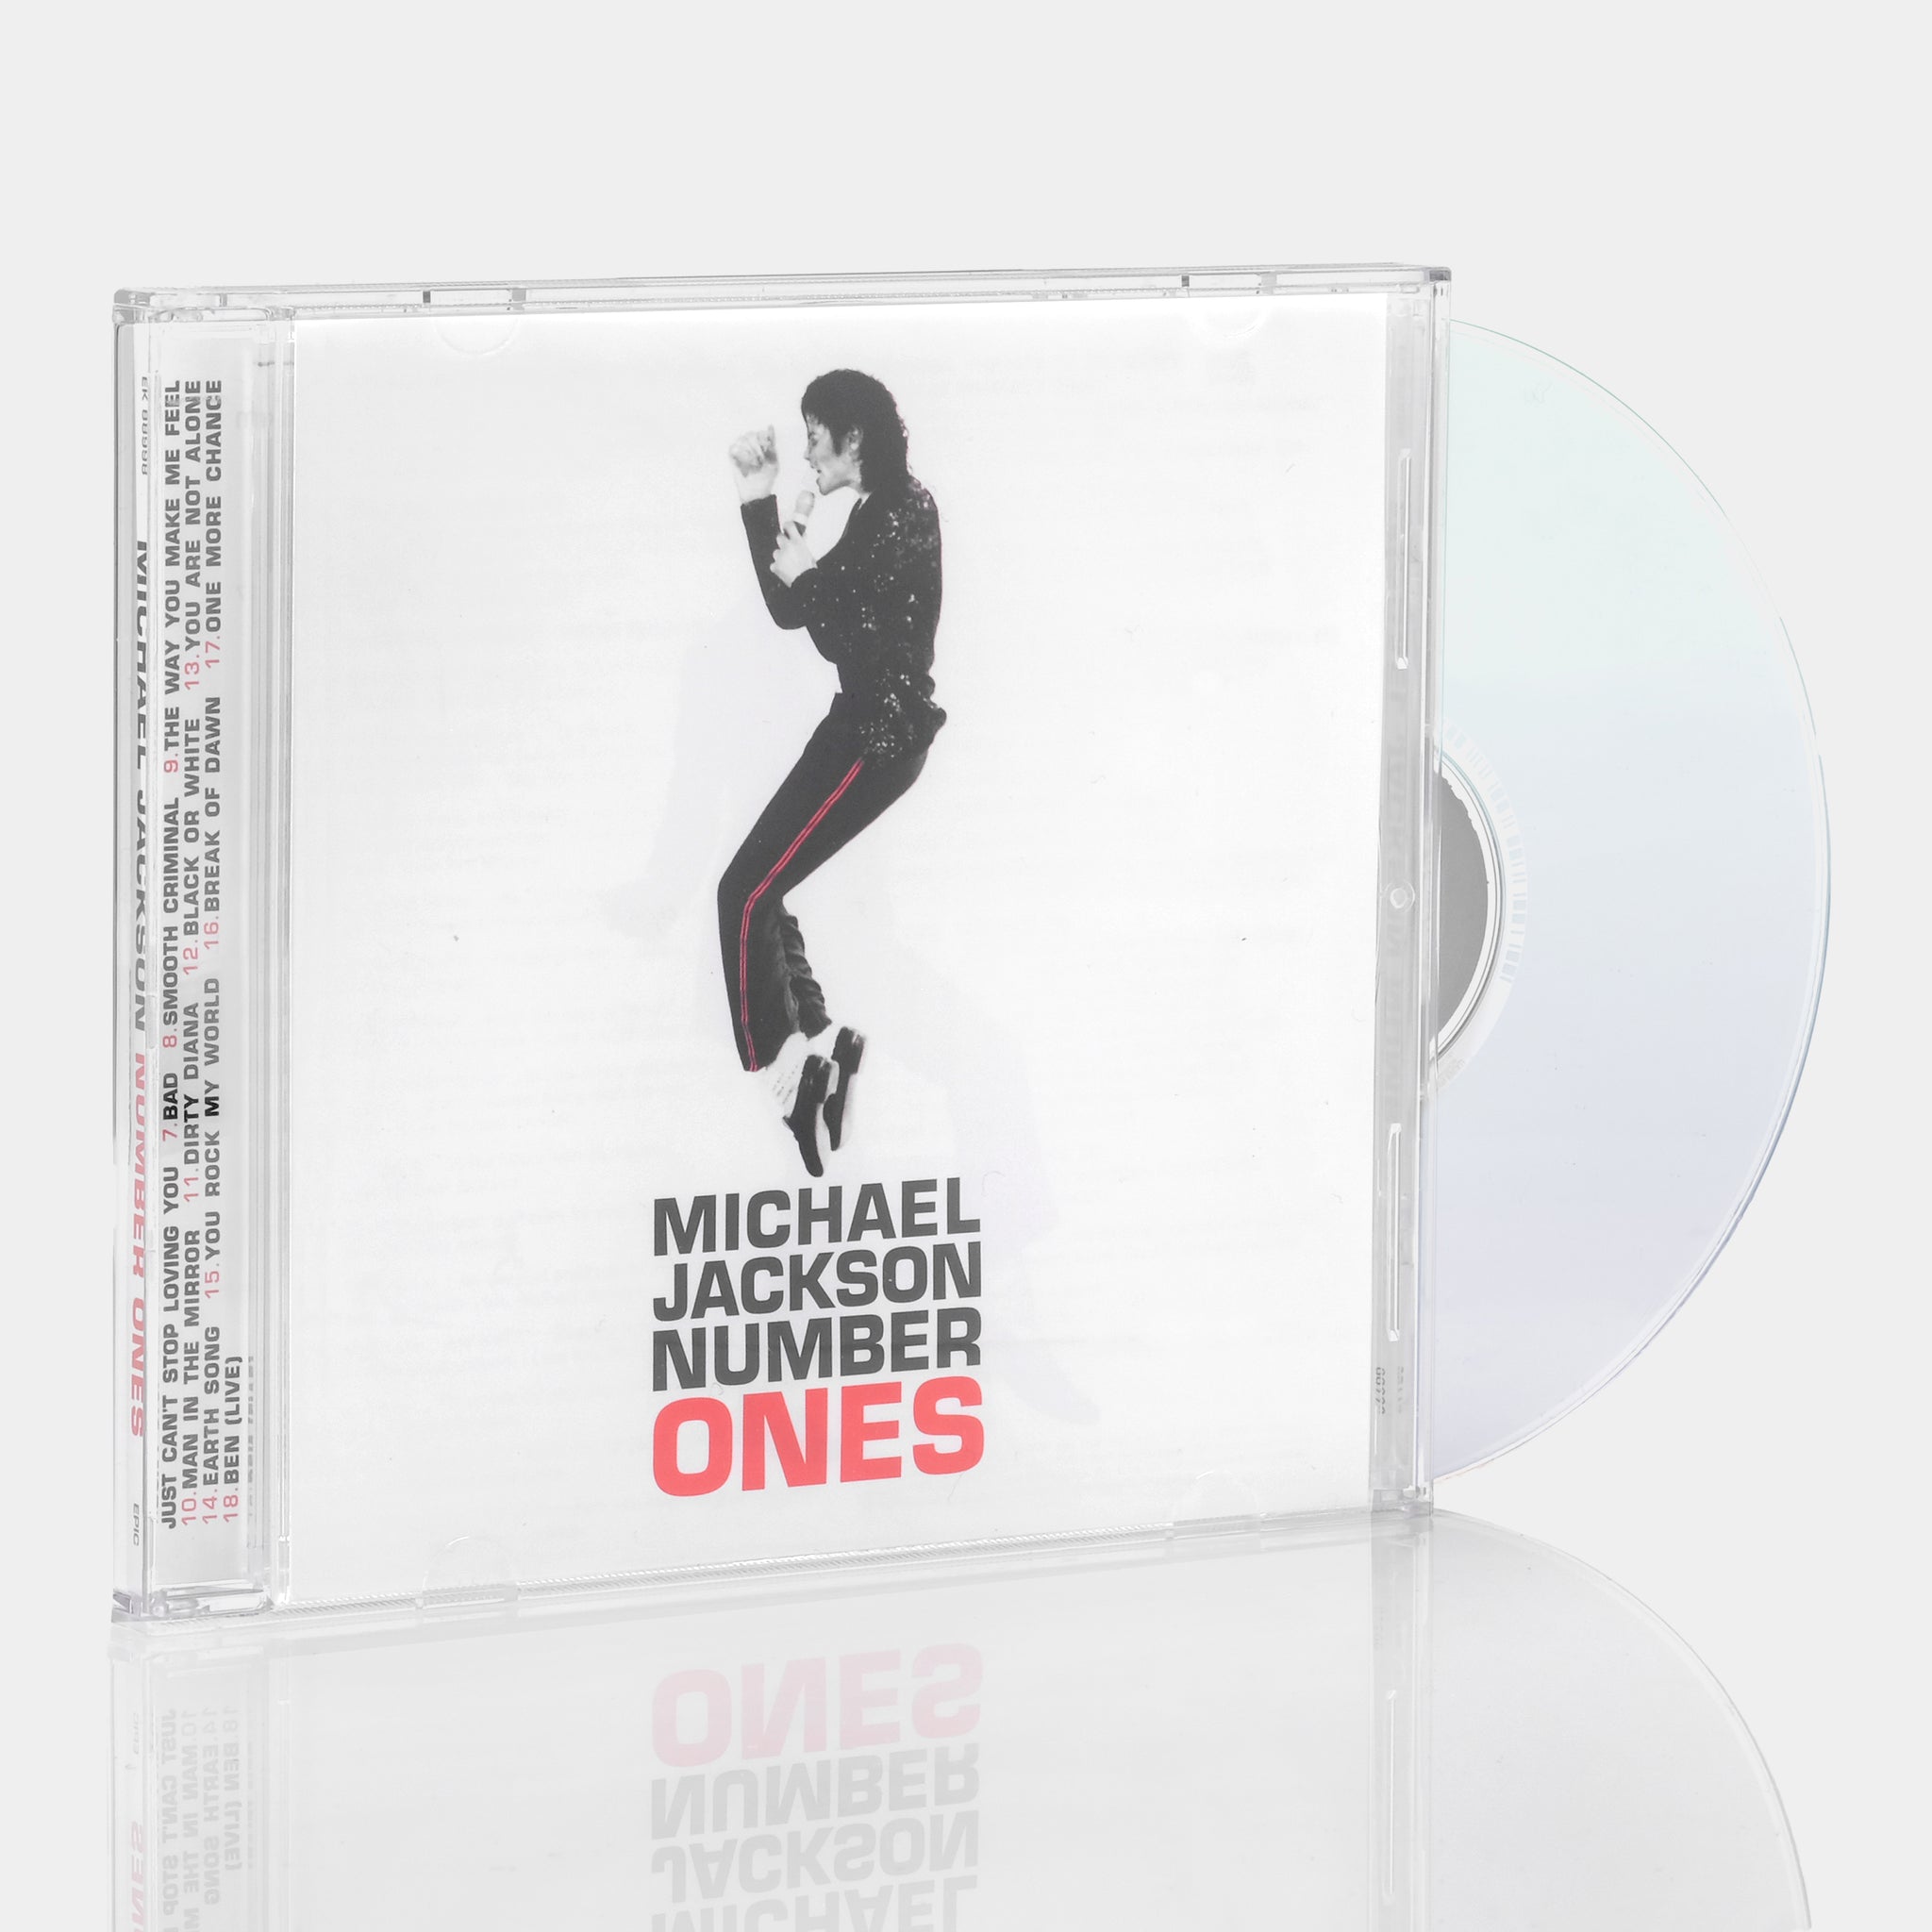 Music CD - Michael Jackson: Thriller And Number Ones - Great